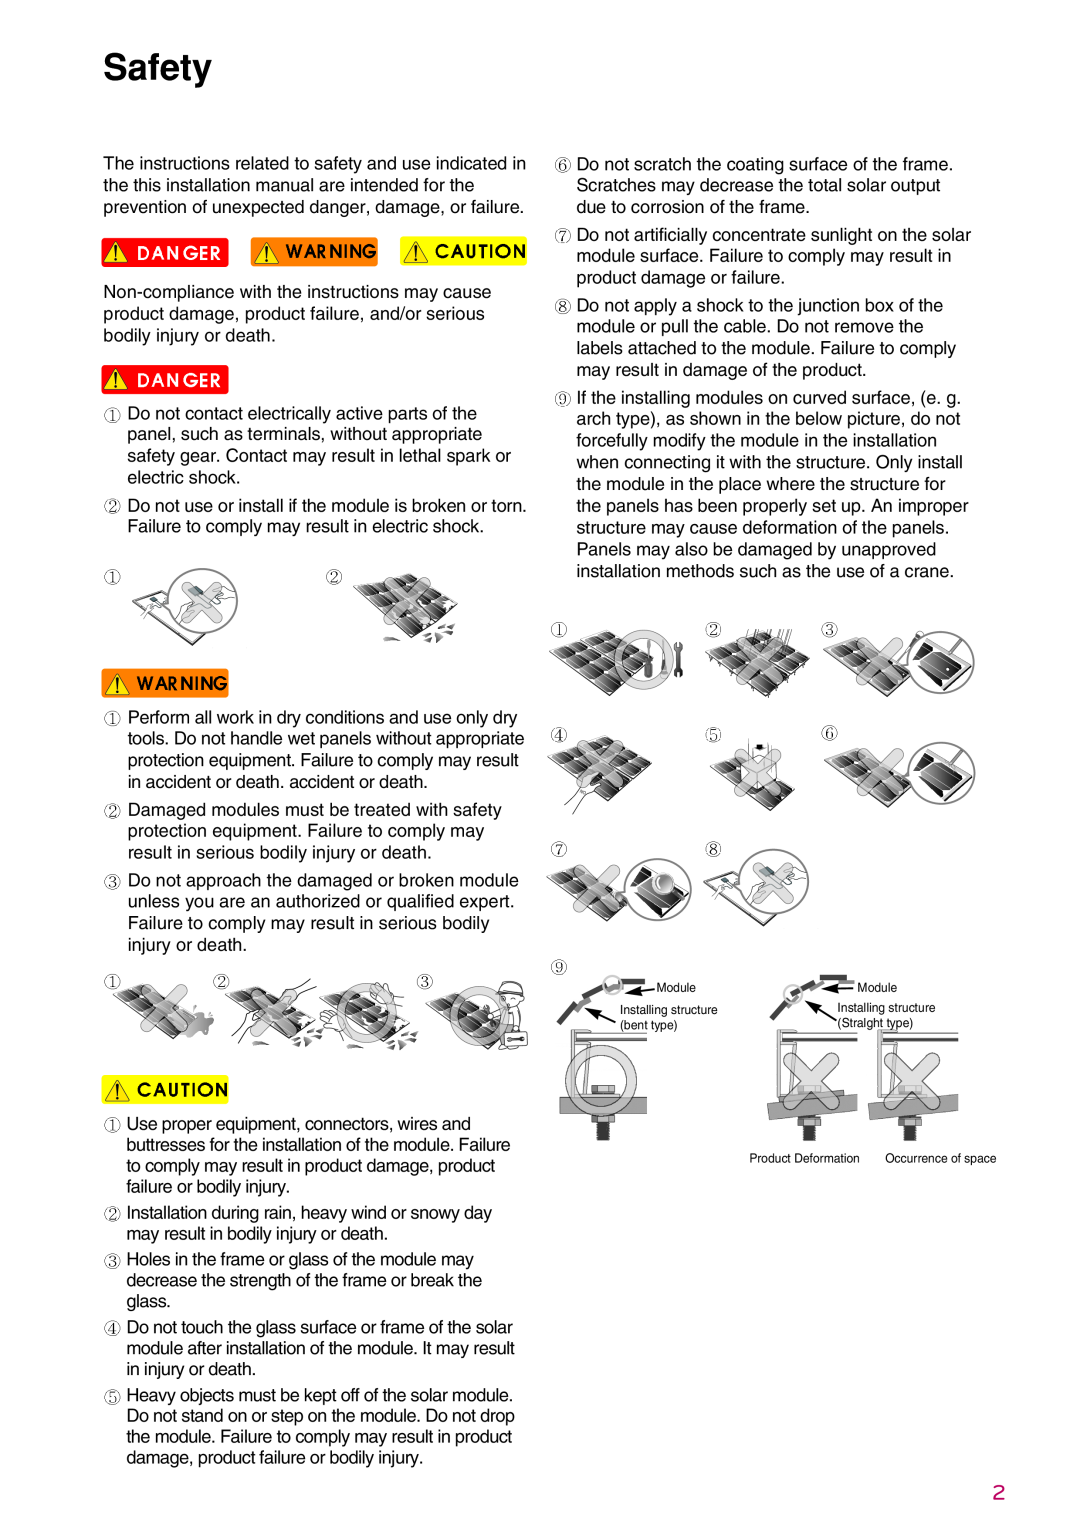 LG Electronics LGXXXS1C(W, K)-G3 installation instructions Safety, Installing structure, Occurrence of space 